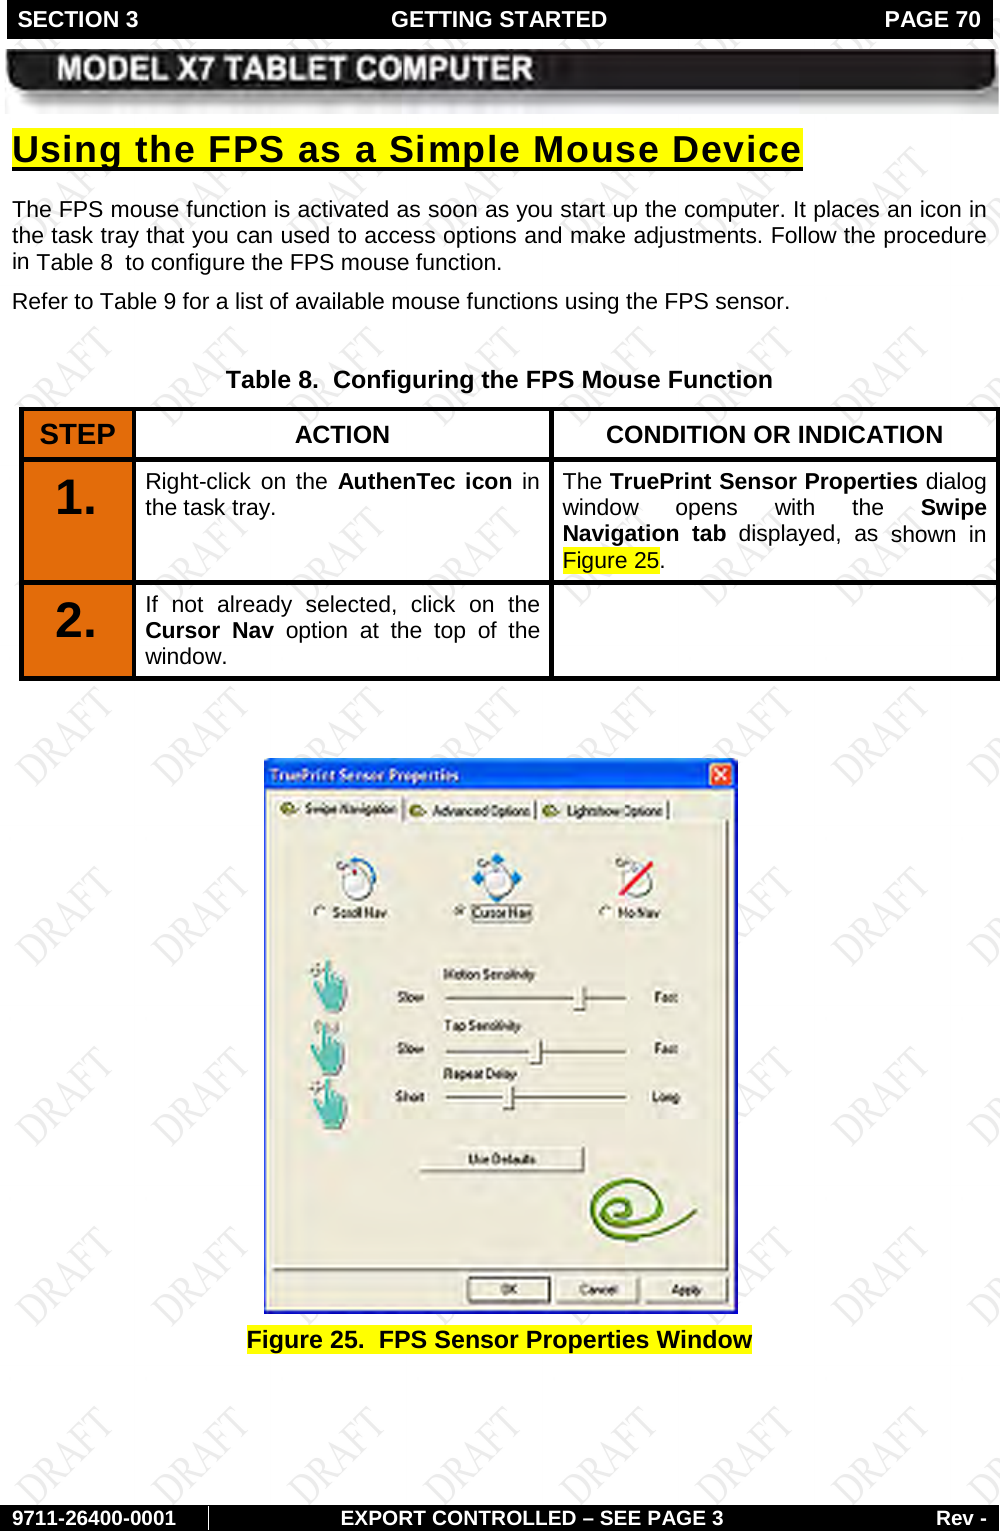 SECTION 3 GETTING STARTED  PAGE 70        9711-26400-0001 EXPORT CONTROLLED – SEE PAGE 3 Rev - The FPS mouse function is activated as soon as you start up the computer. It places an icon in the task tray that you can used to access options and make adjustments. Follow the procedure in Using the FPS as a Simple Mouse Device Table 8  to configure the FPS mouse function. Refer to Table 9 for a list of available mouse functions using the FPS sensor.  Table 8.  Configuring the FPS Mouse Function STEP  ACTION CONDITION OR INDICATION 1.   Right-click on the AuthenTec icon in the task tray.   The TruePrint Sensor Properties dialog window opens with the Swipe Navigation tab displayed, as shown in Figure 25. 2.  If not already selected, click on the Cursor Nav option at the top of the window.     Figure 25.  FPS Sensor Properties Window    